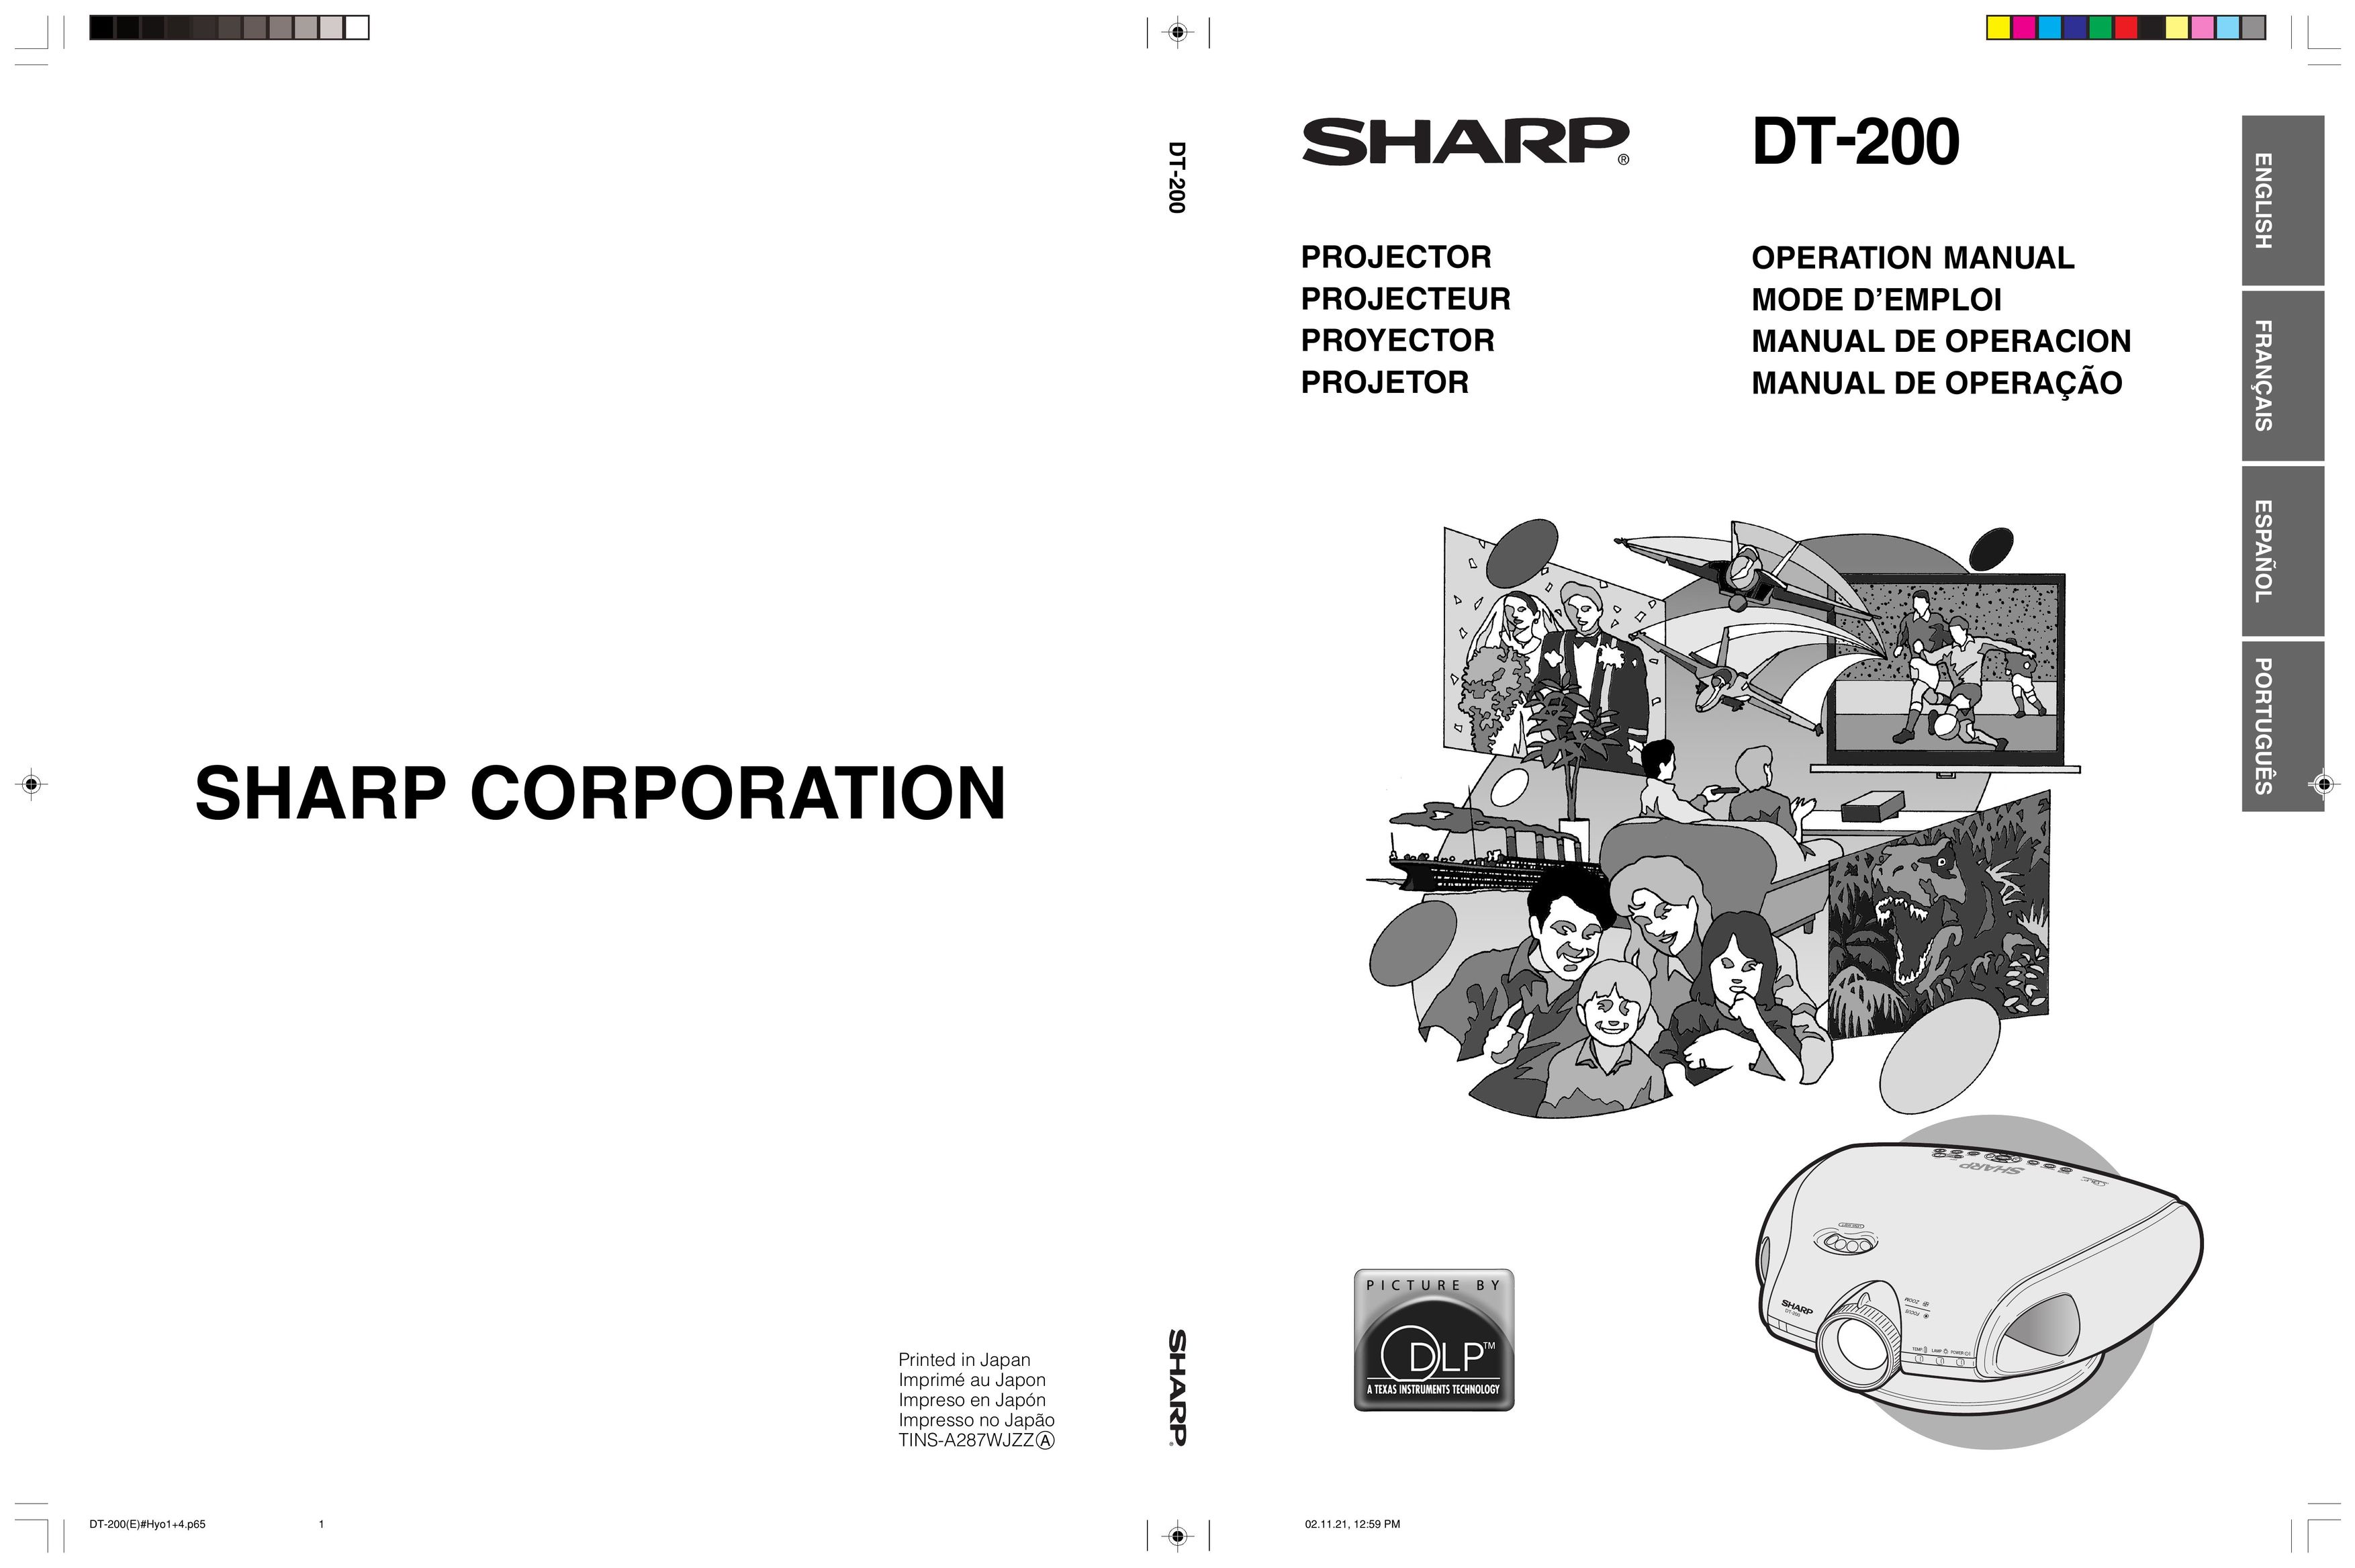 Sharp DT-200 Home Theater System User Manual